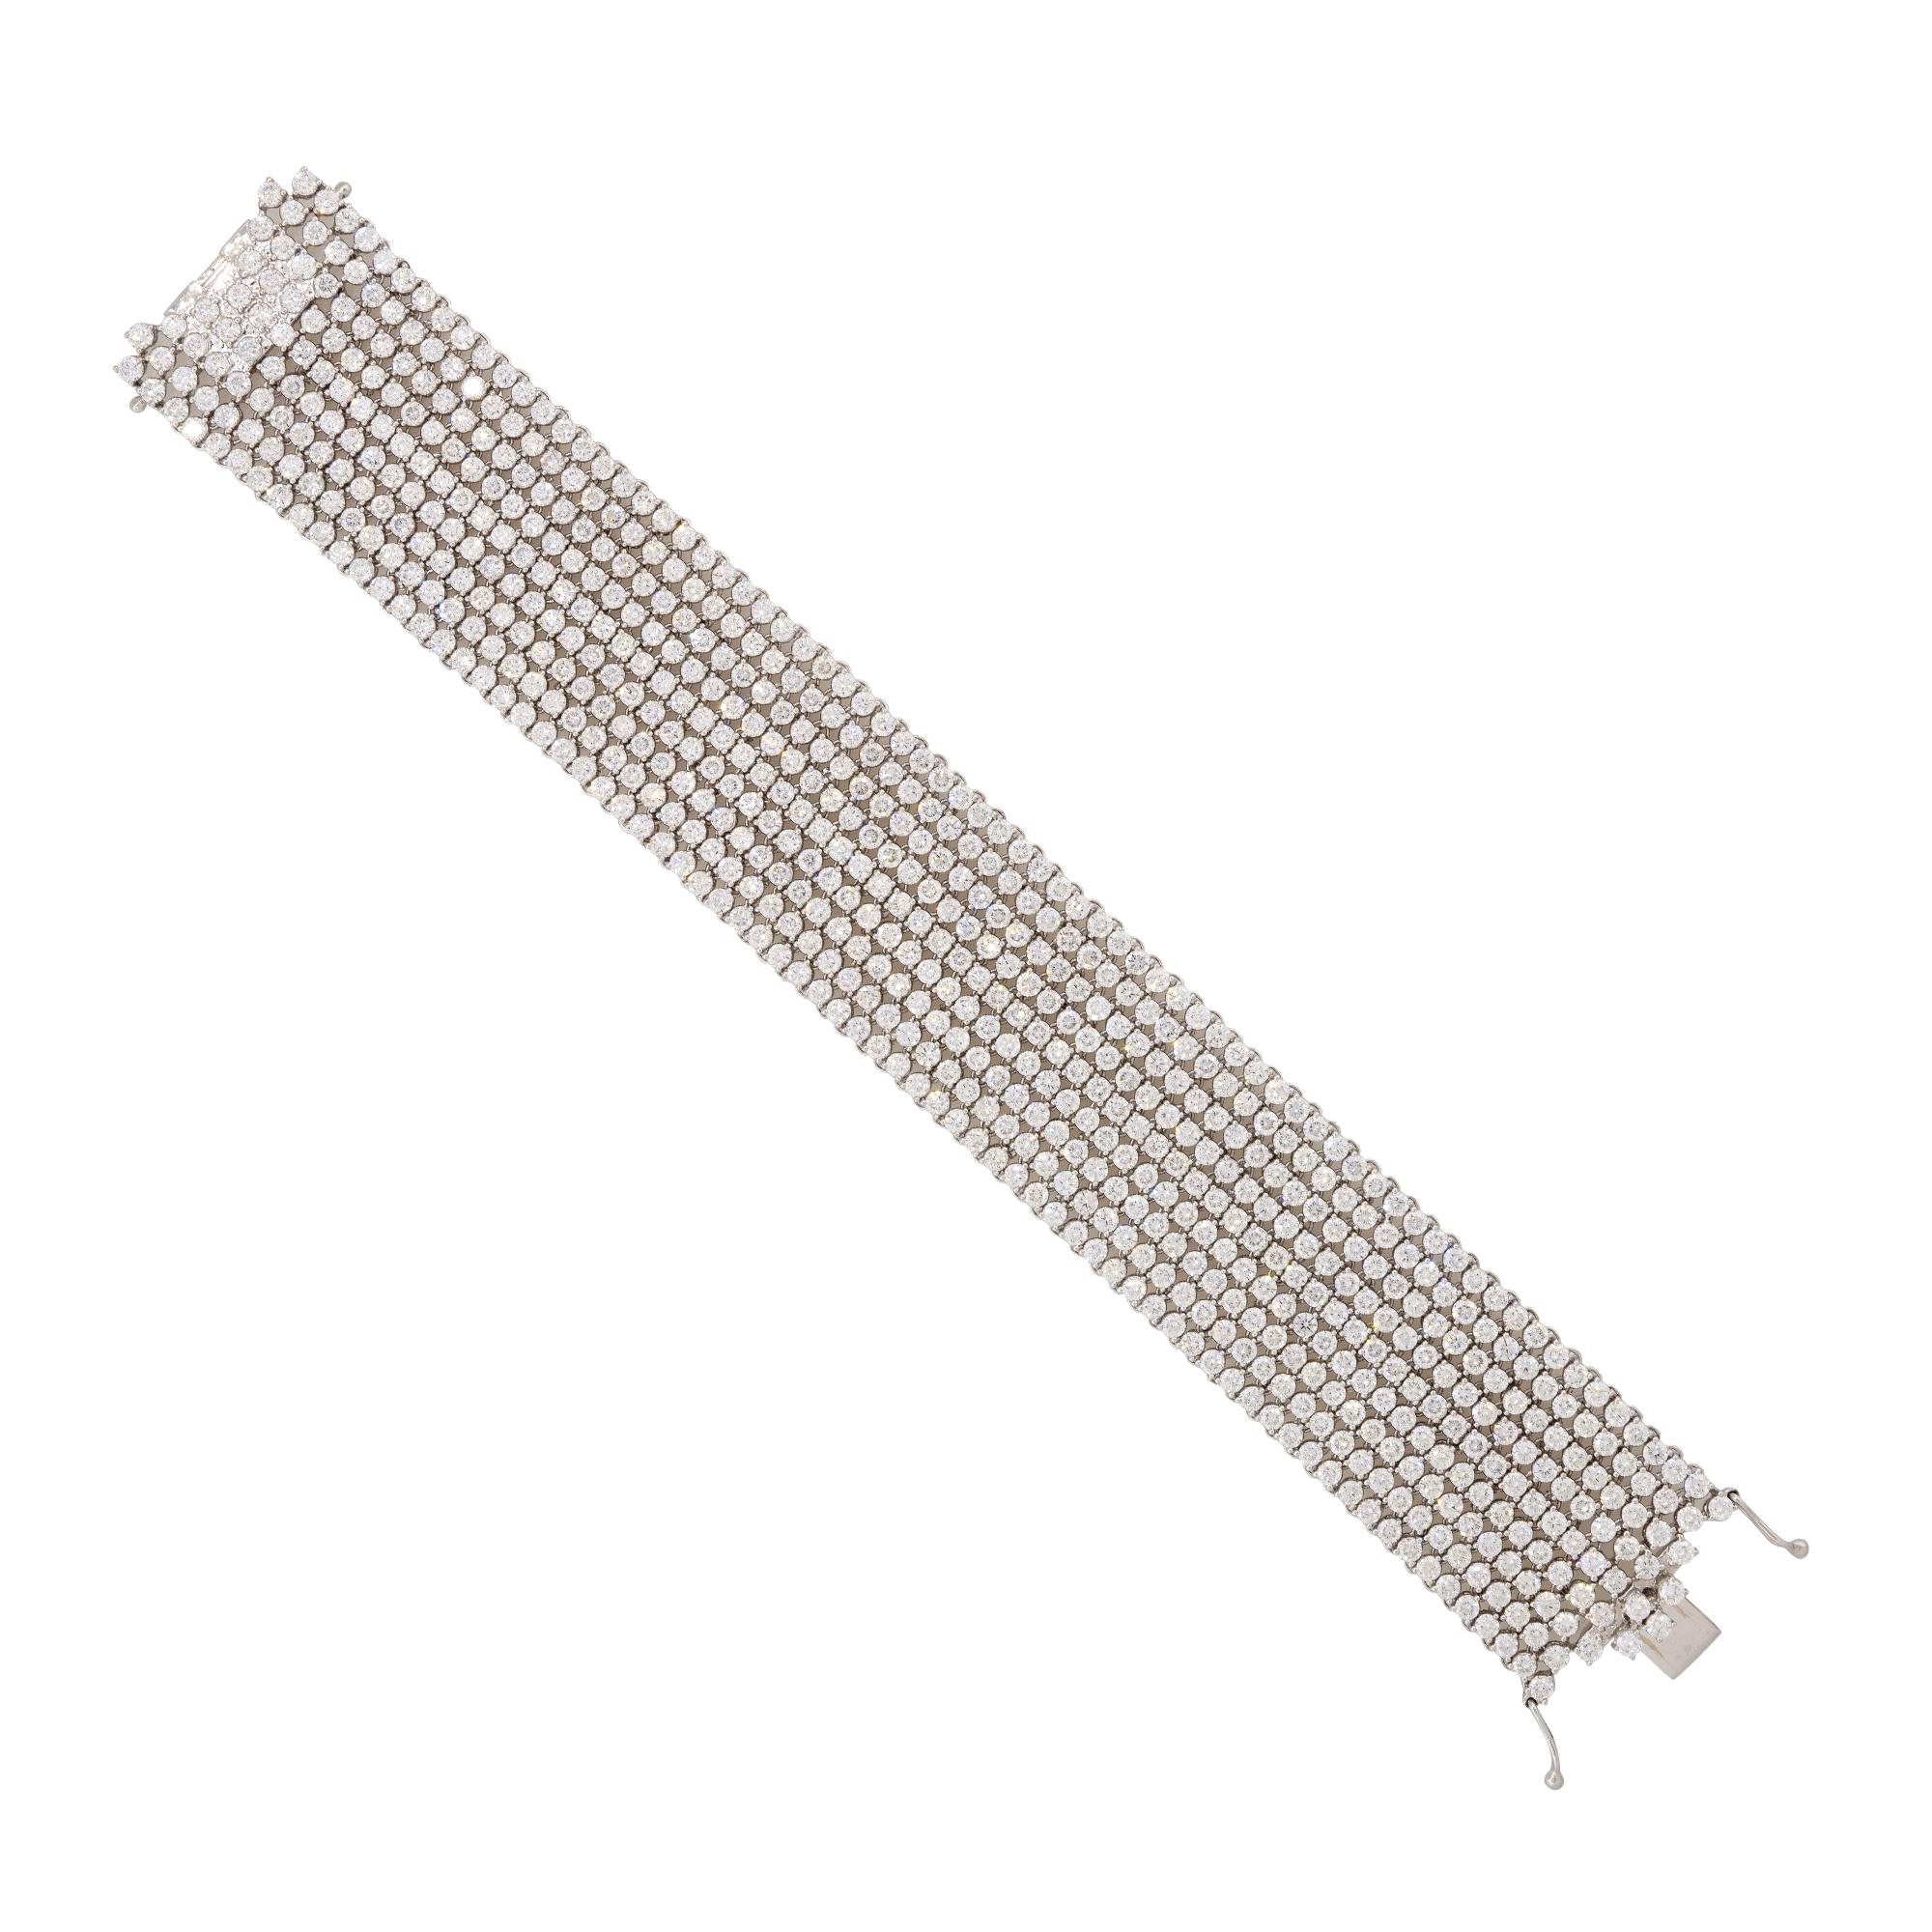 Style: Wide, 9 Row, Diamond Tennis Bracelet 
Material: 18 Karat White Gold
Diamond Details: Approximately 27.90 carats of Round Brilliant cut diamonds. Total of 648 diamonds.
Diamond Clarity: VS/SI (Very Slightly Included to Slightly